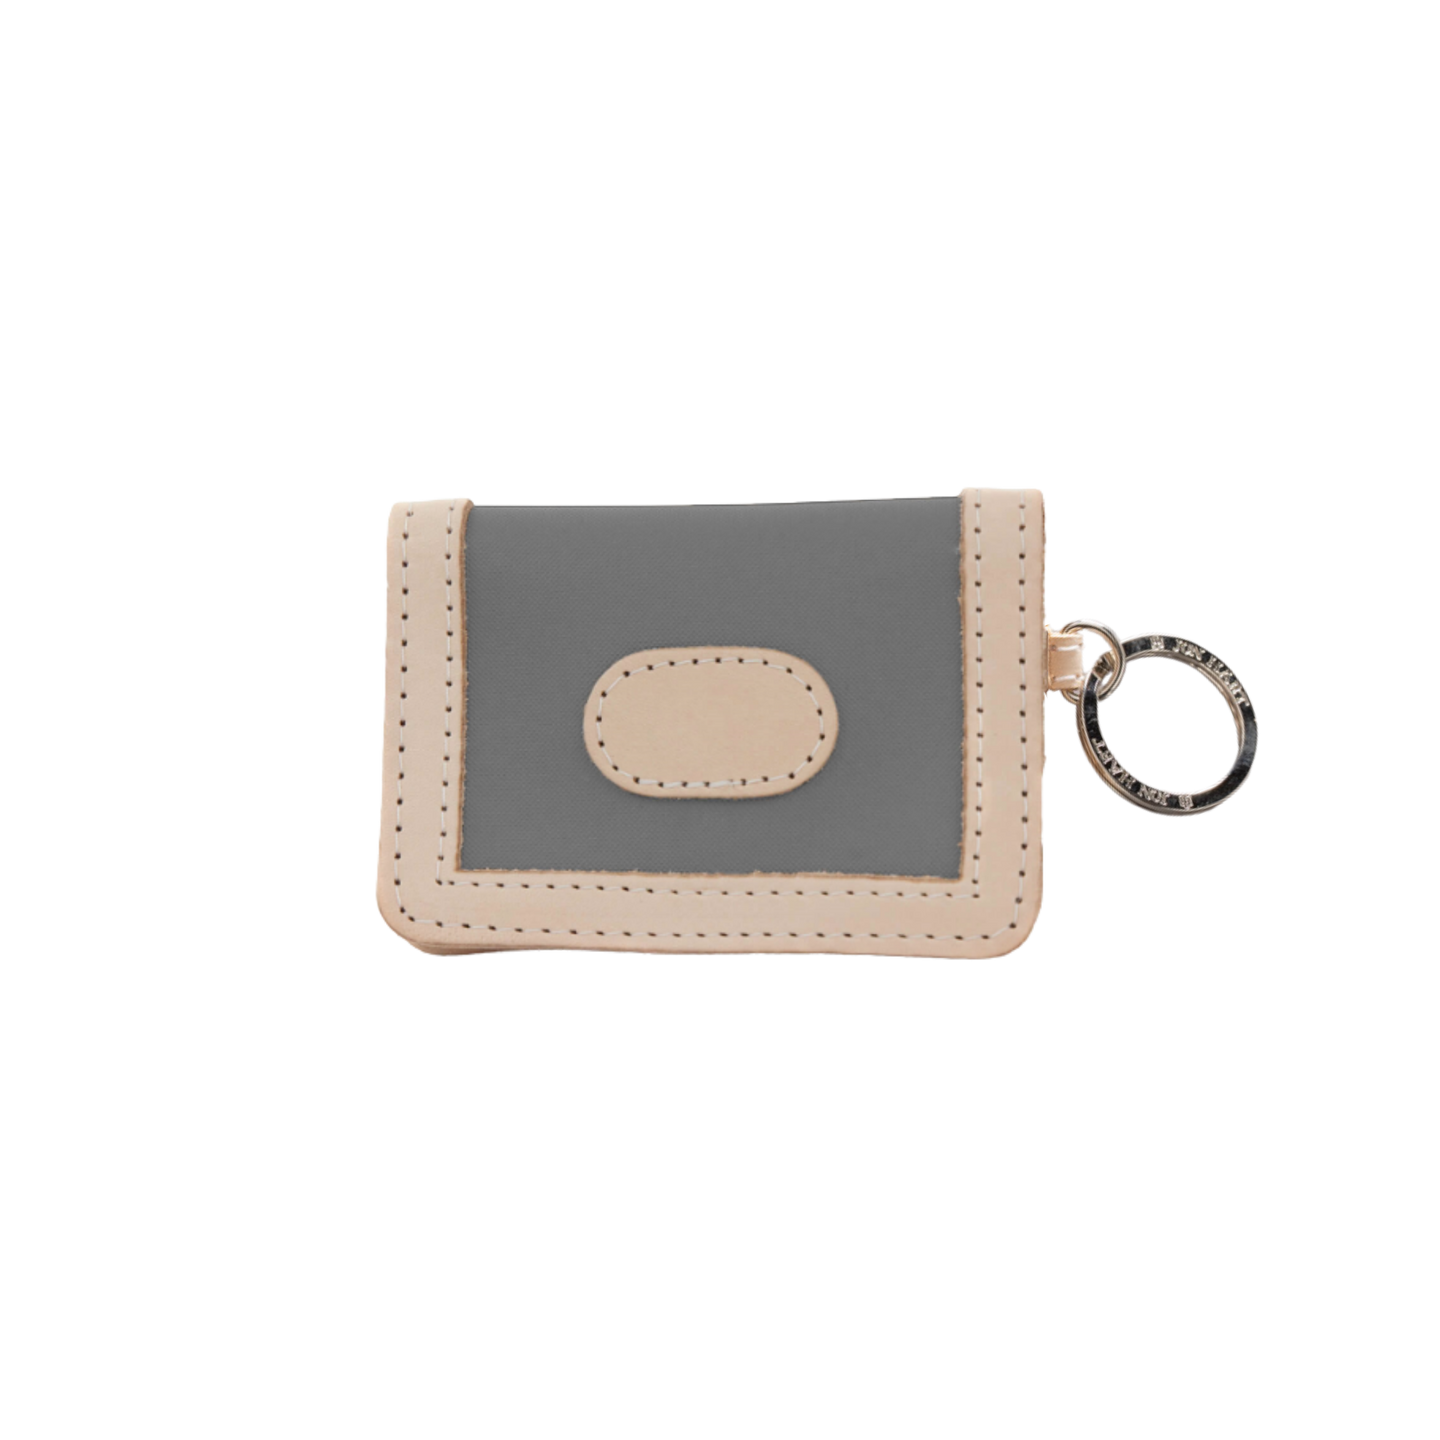 ID Wallet - Slate Coated Canvas Front Angle in Color 'Slate Coated Canvas'